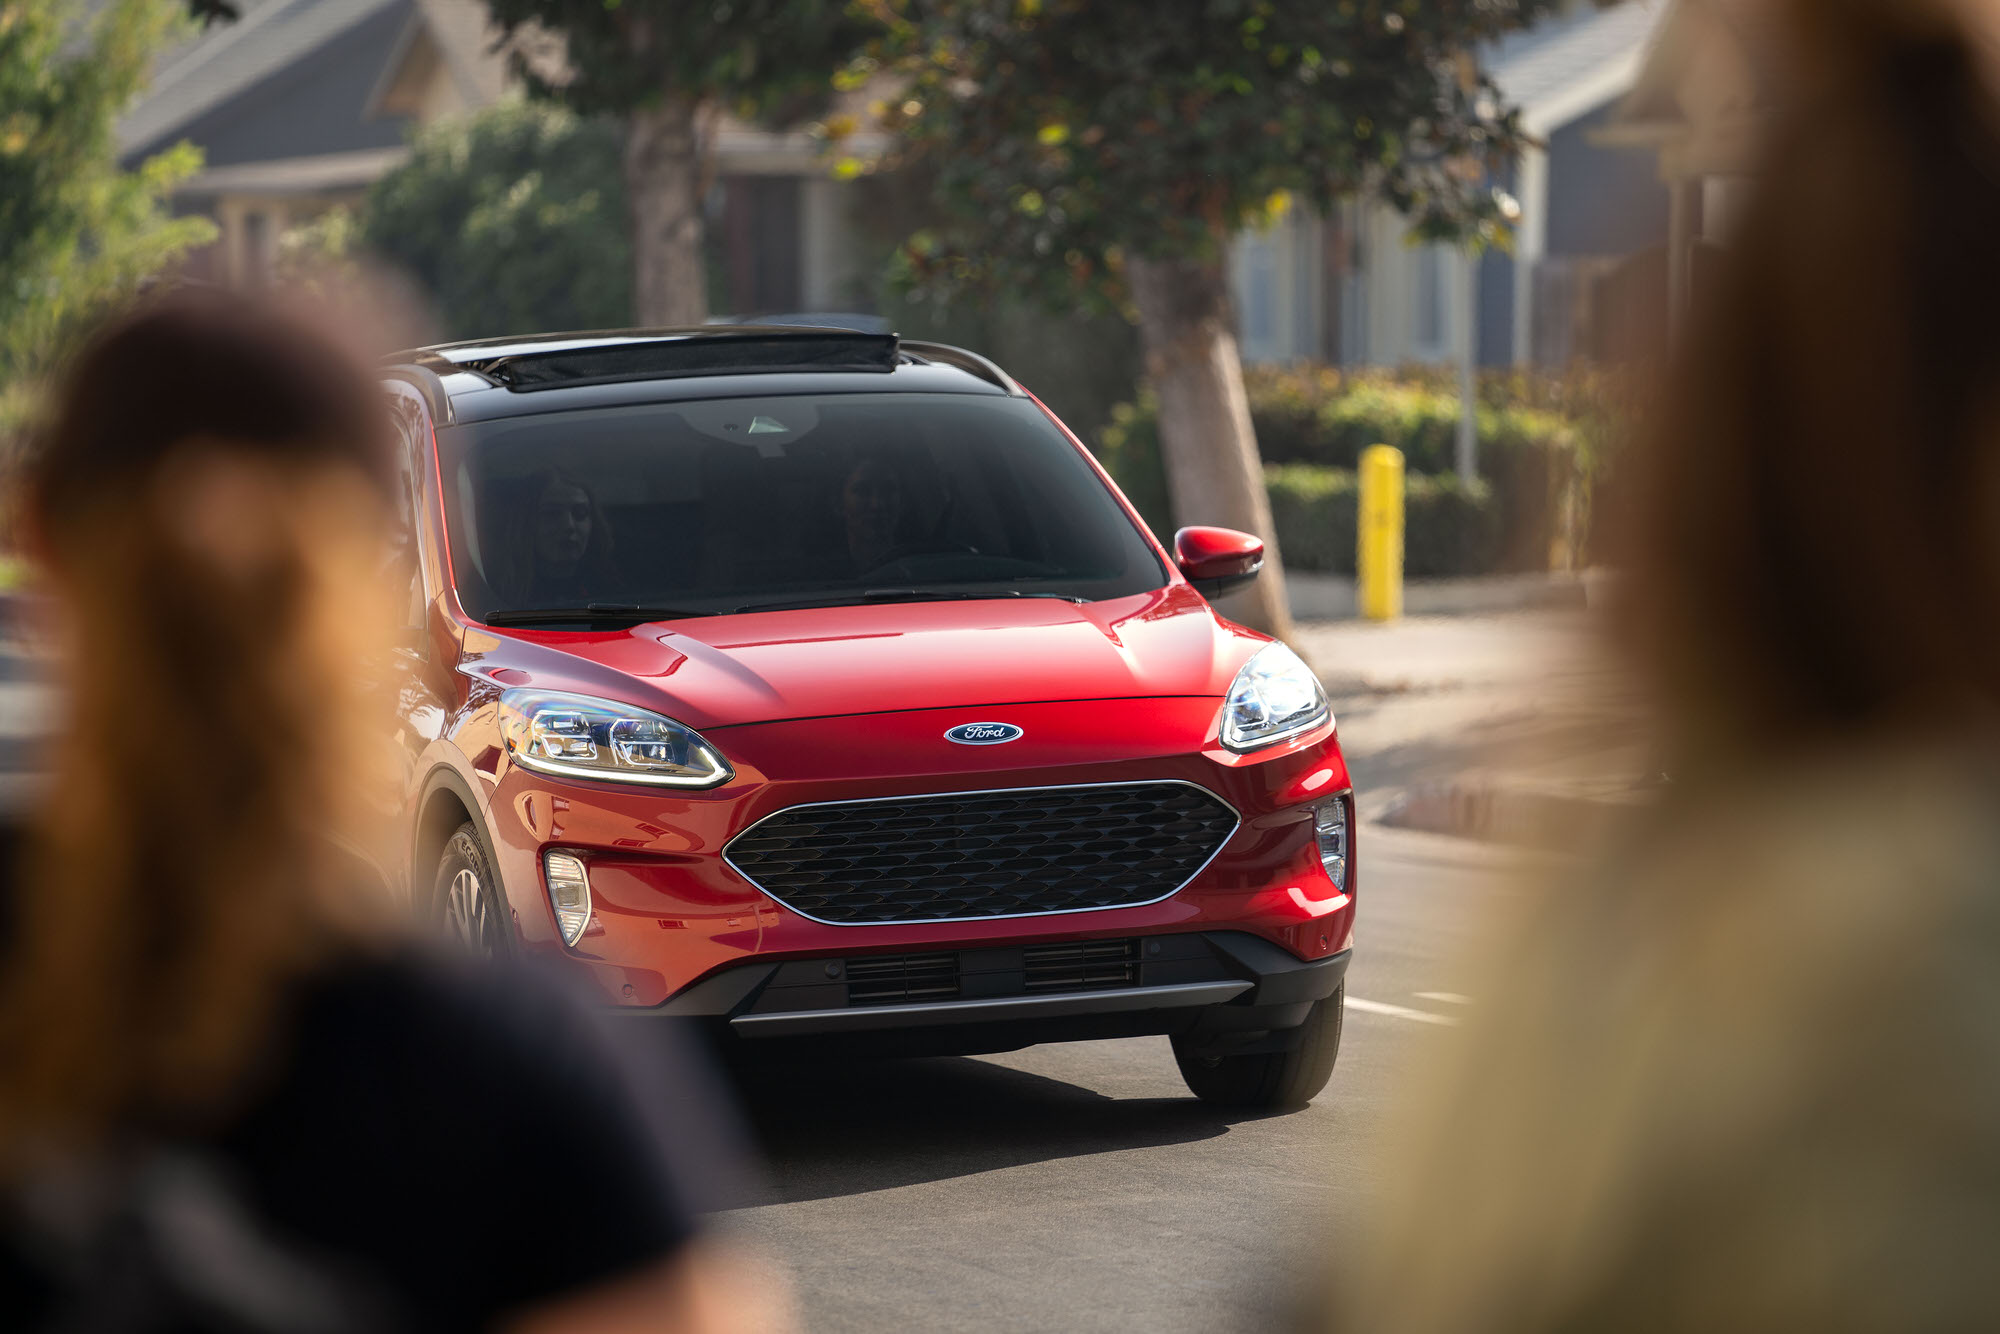 2020 Ford Escape commercial photography in Los Angeles, CA